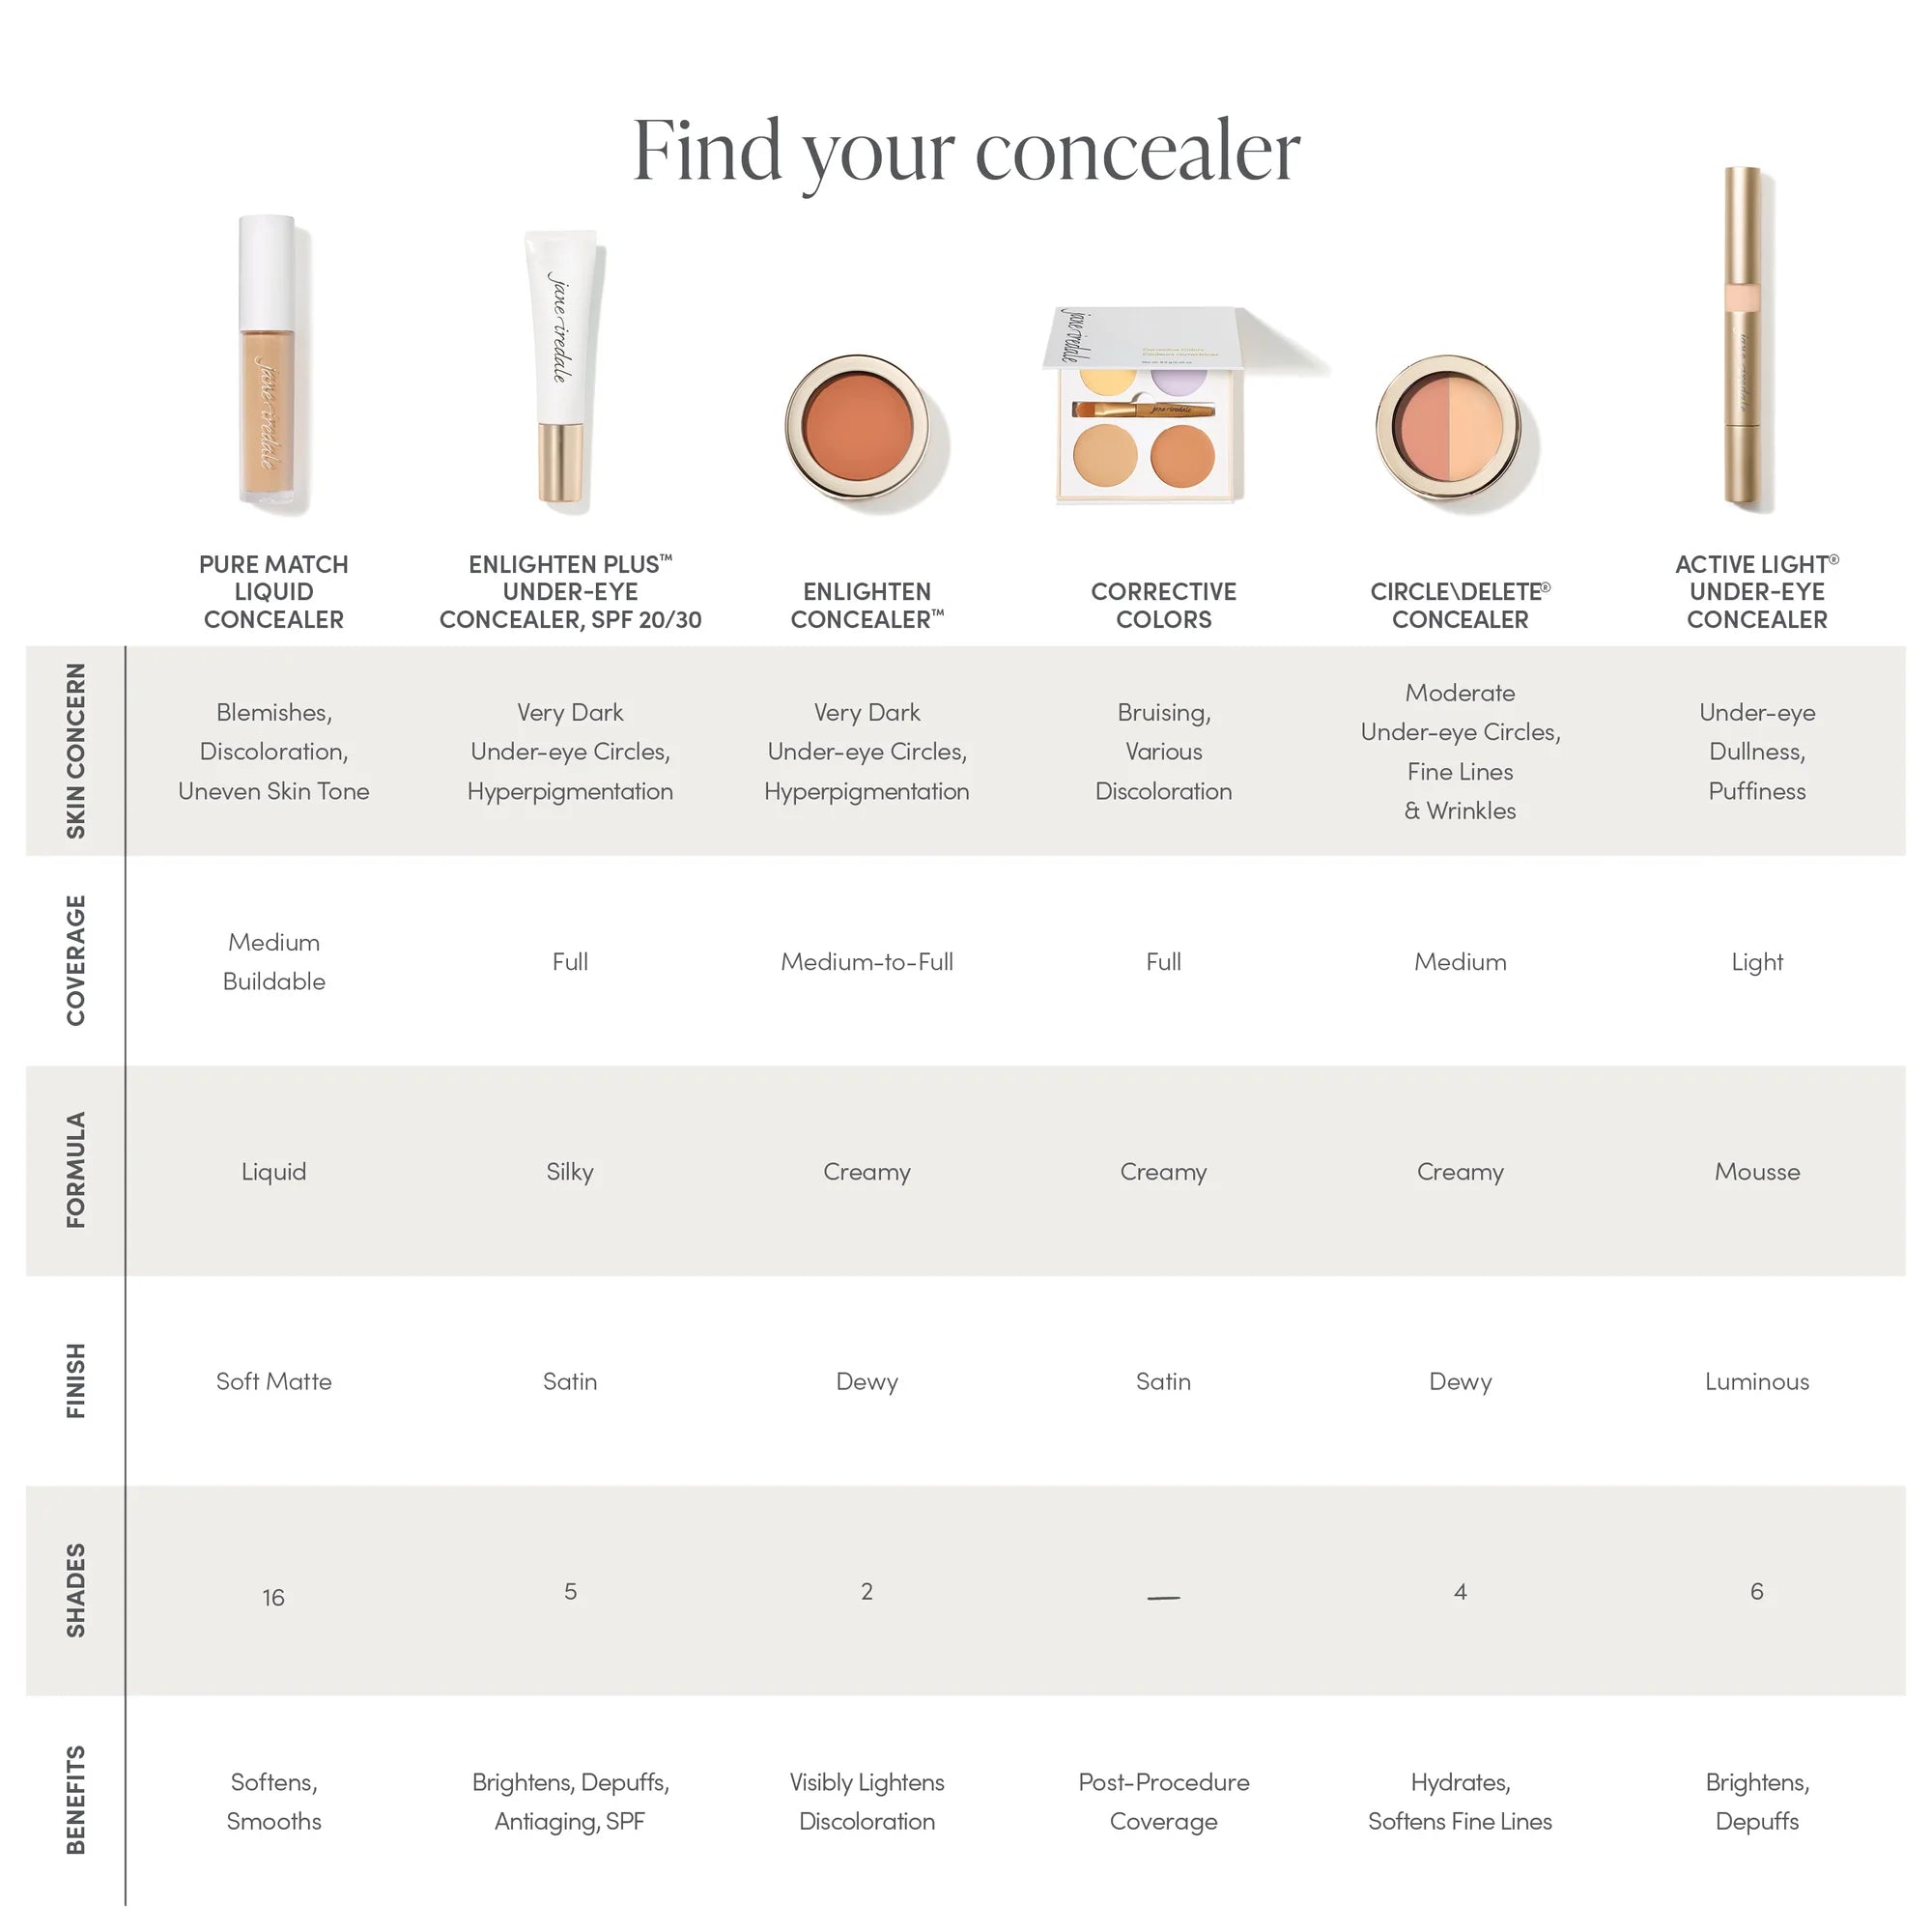 Jane Iredale's Concealers and Correctors chart